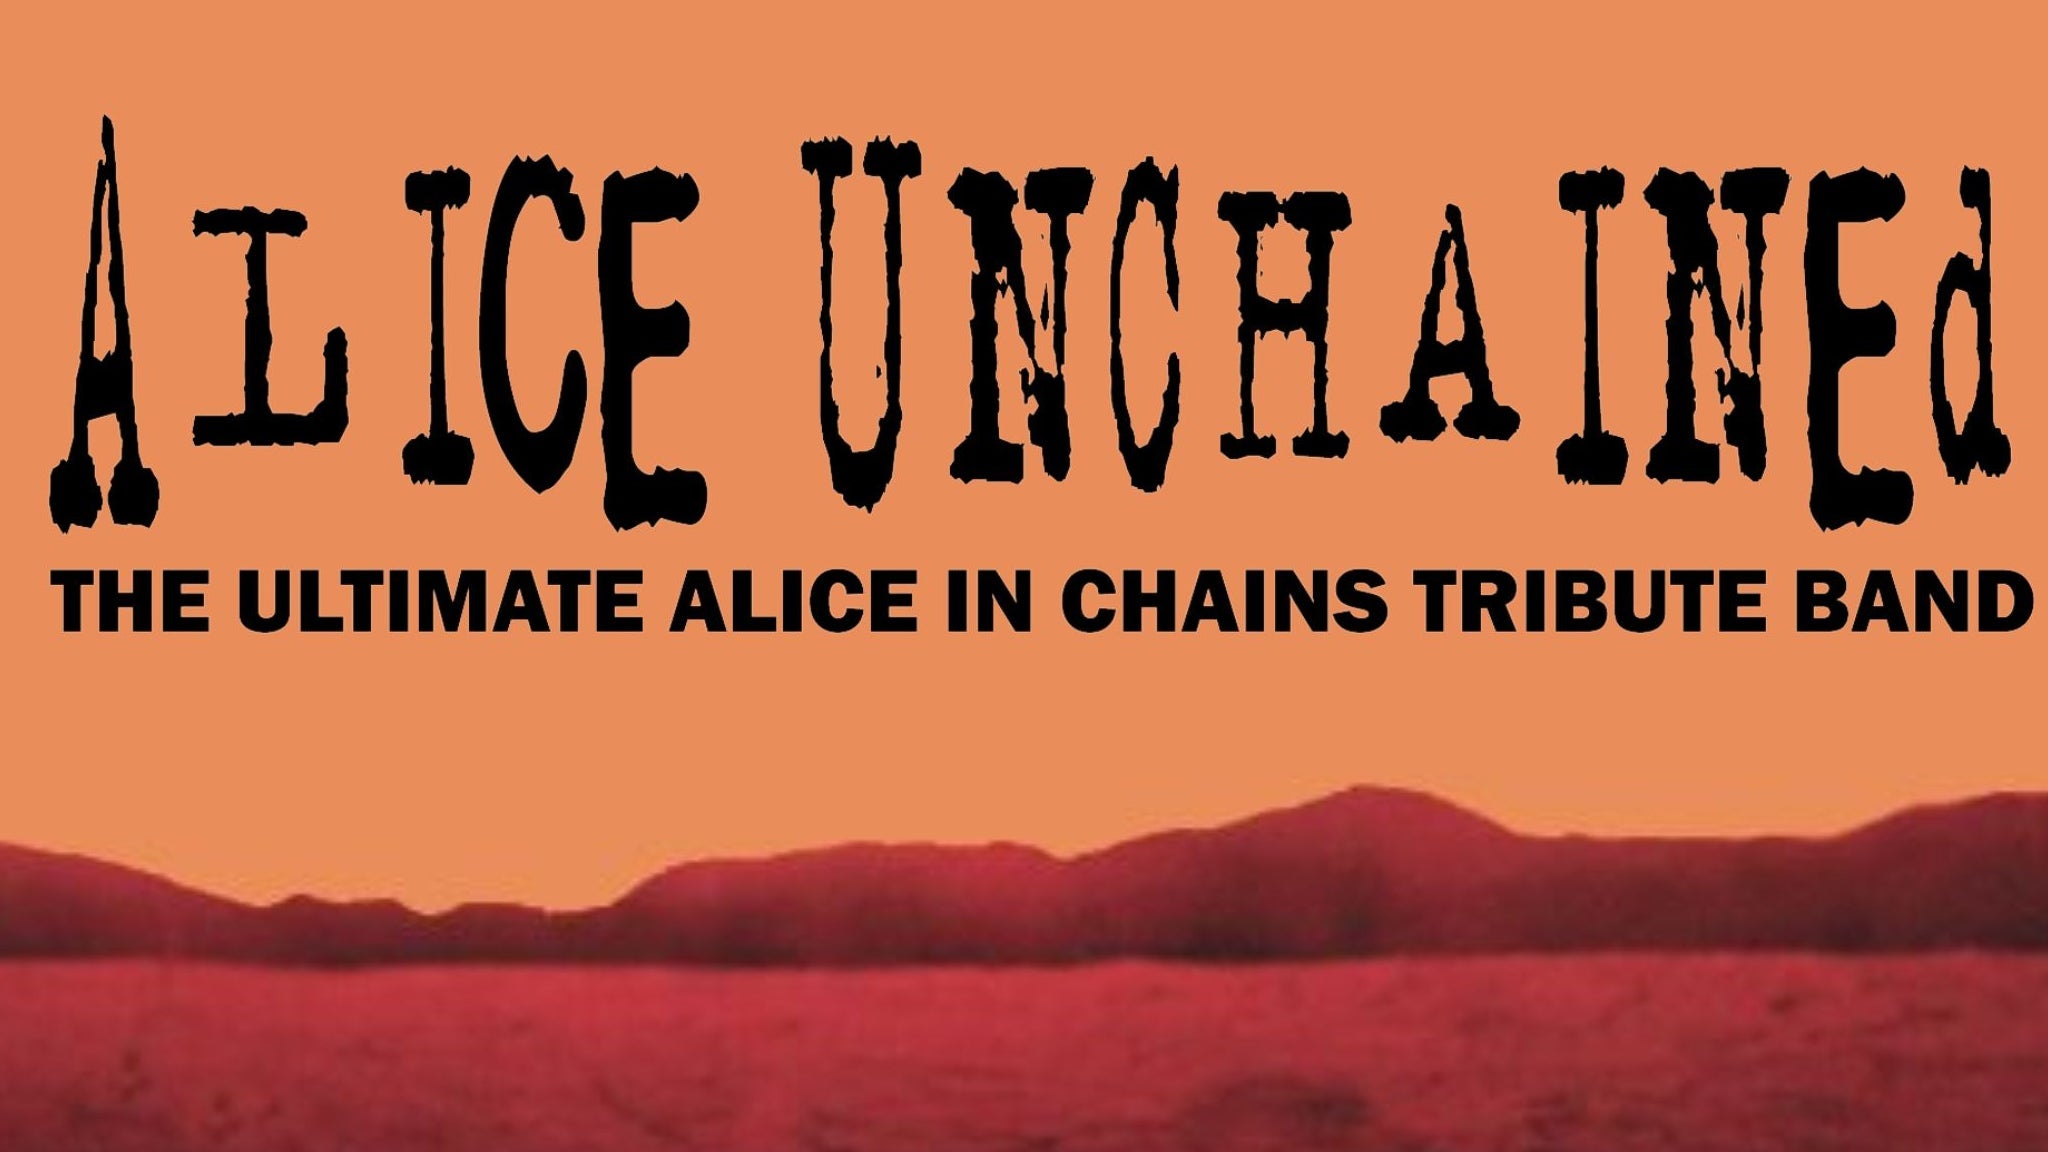 Alice Unchained - The Ultimate Alice In Chains Tribute Band